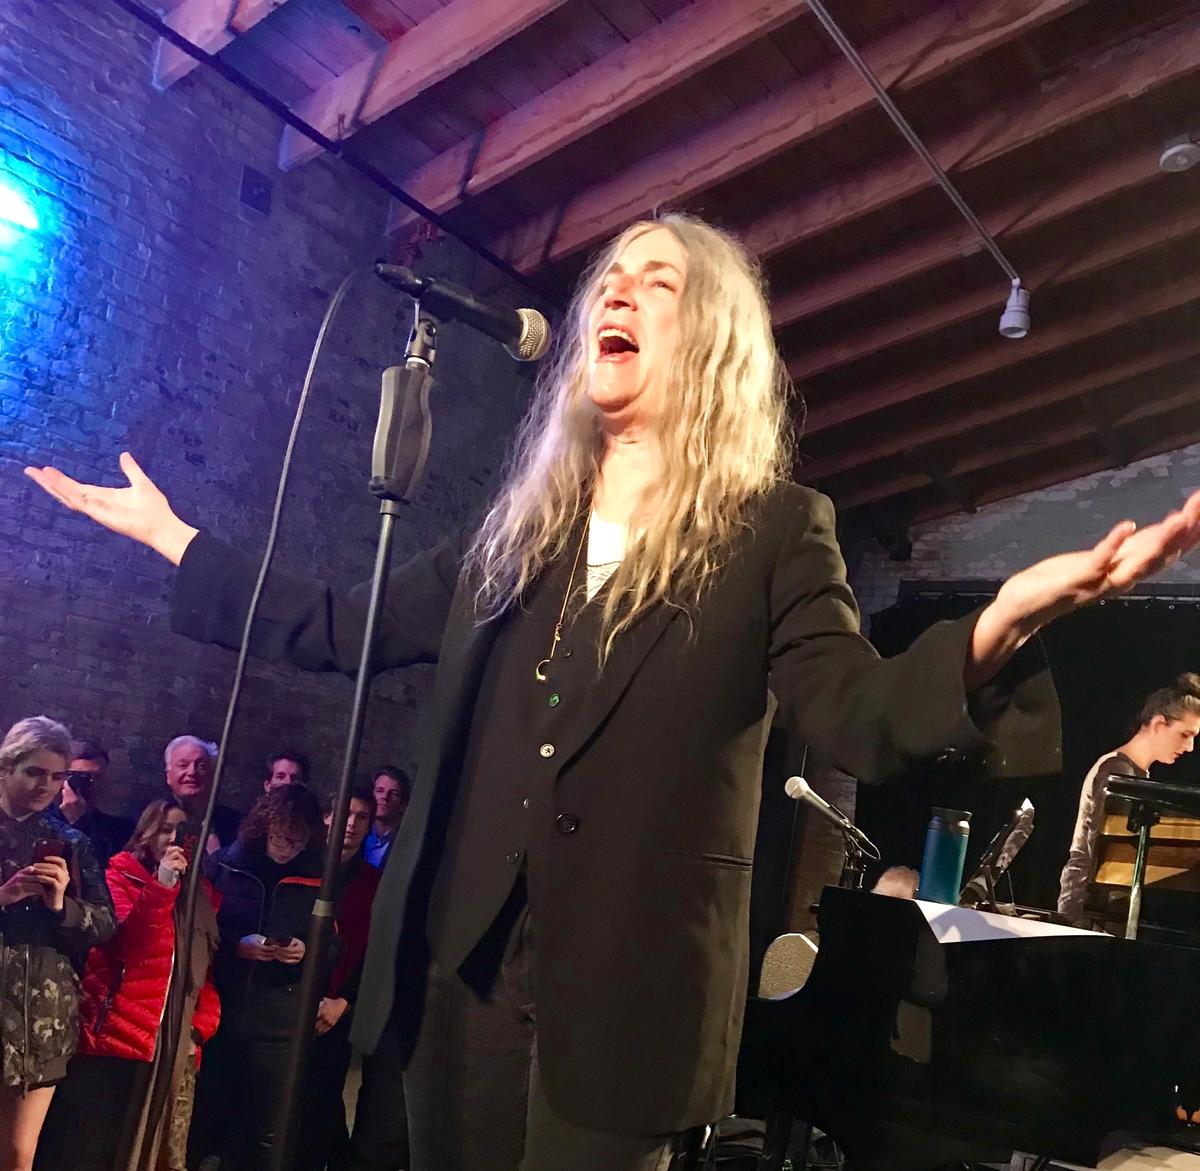 The US singer, poet and artist Patti Smith performing at Hauser & Wirth Louisa Buck